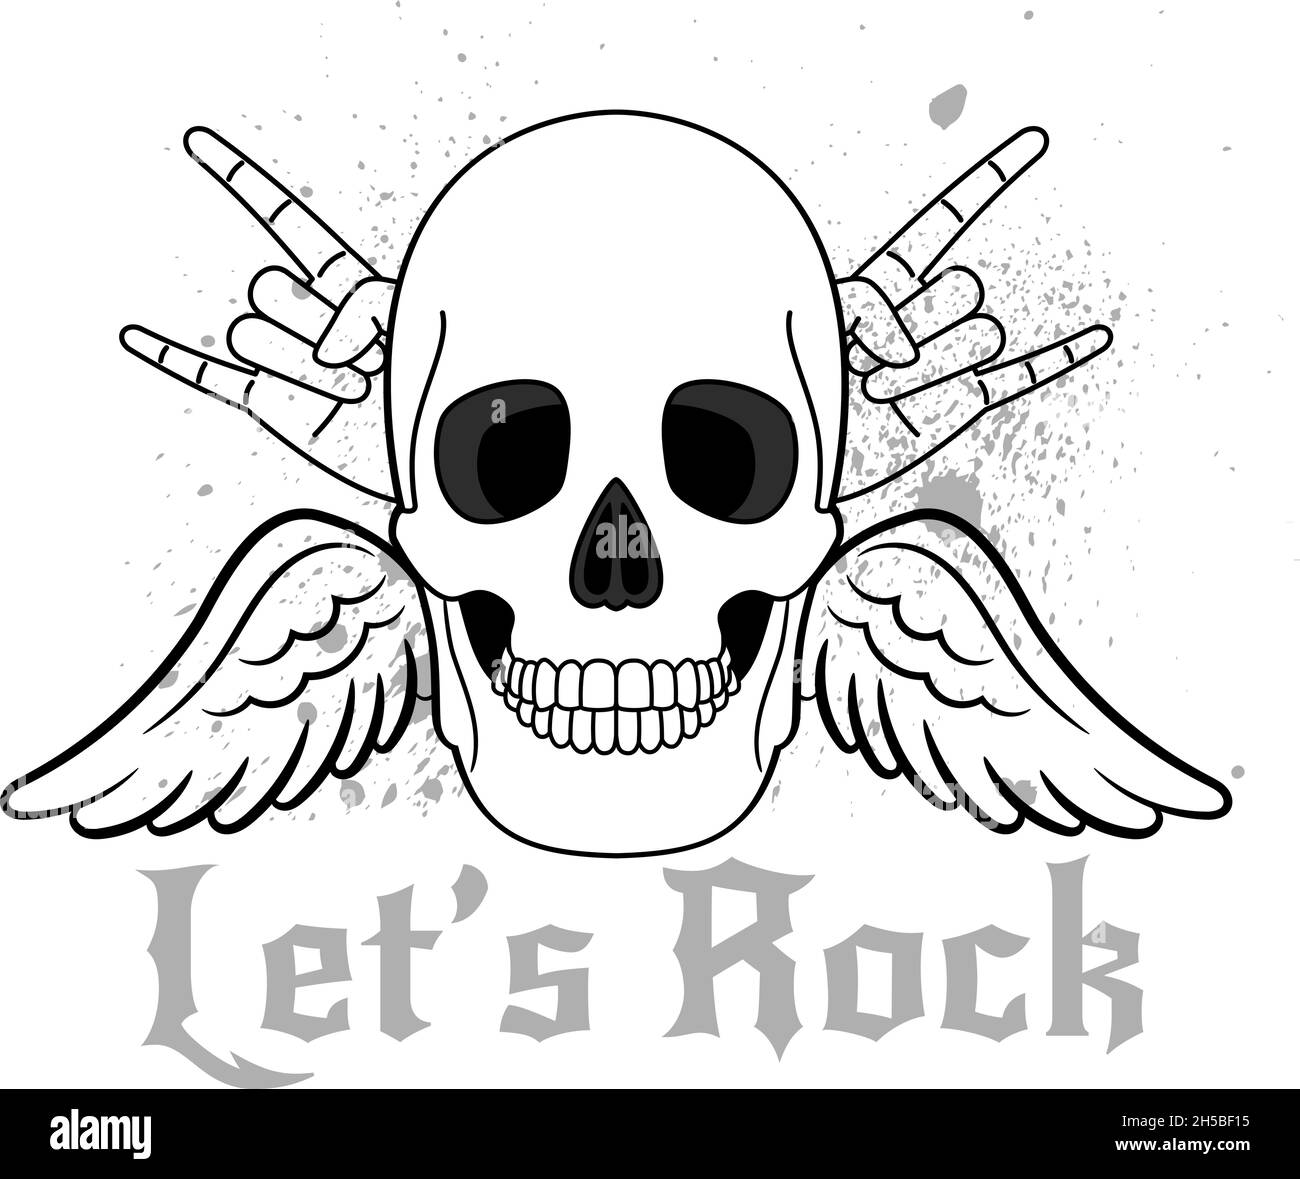 Lets rock logo. Cartoon sticker of cool skull, poster element of musical festivals, vector illustration tattoo for musicians of metal music isolated on white background Stock Vector